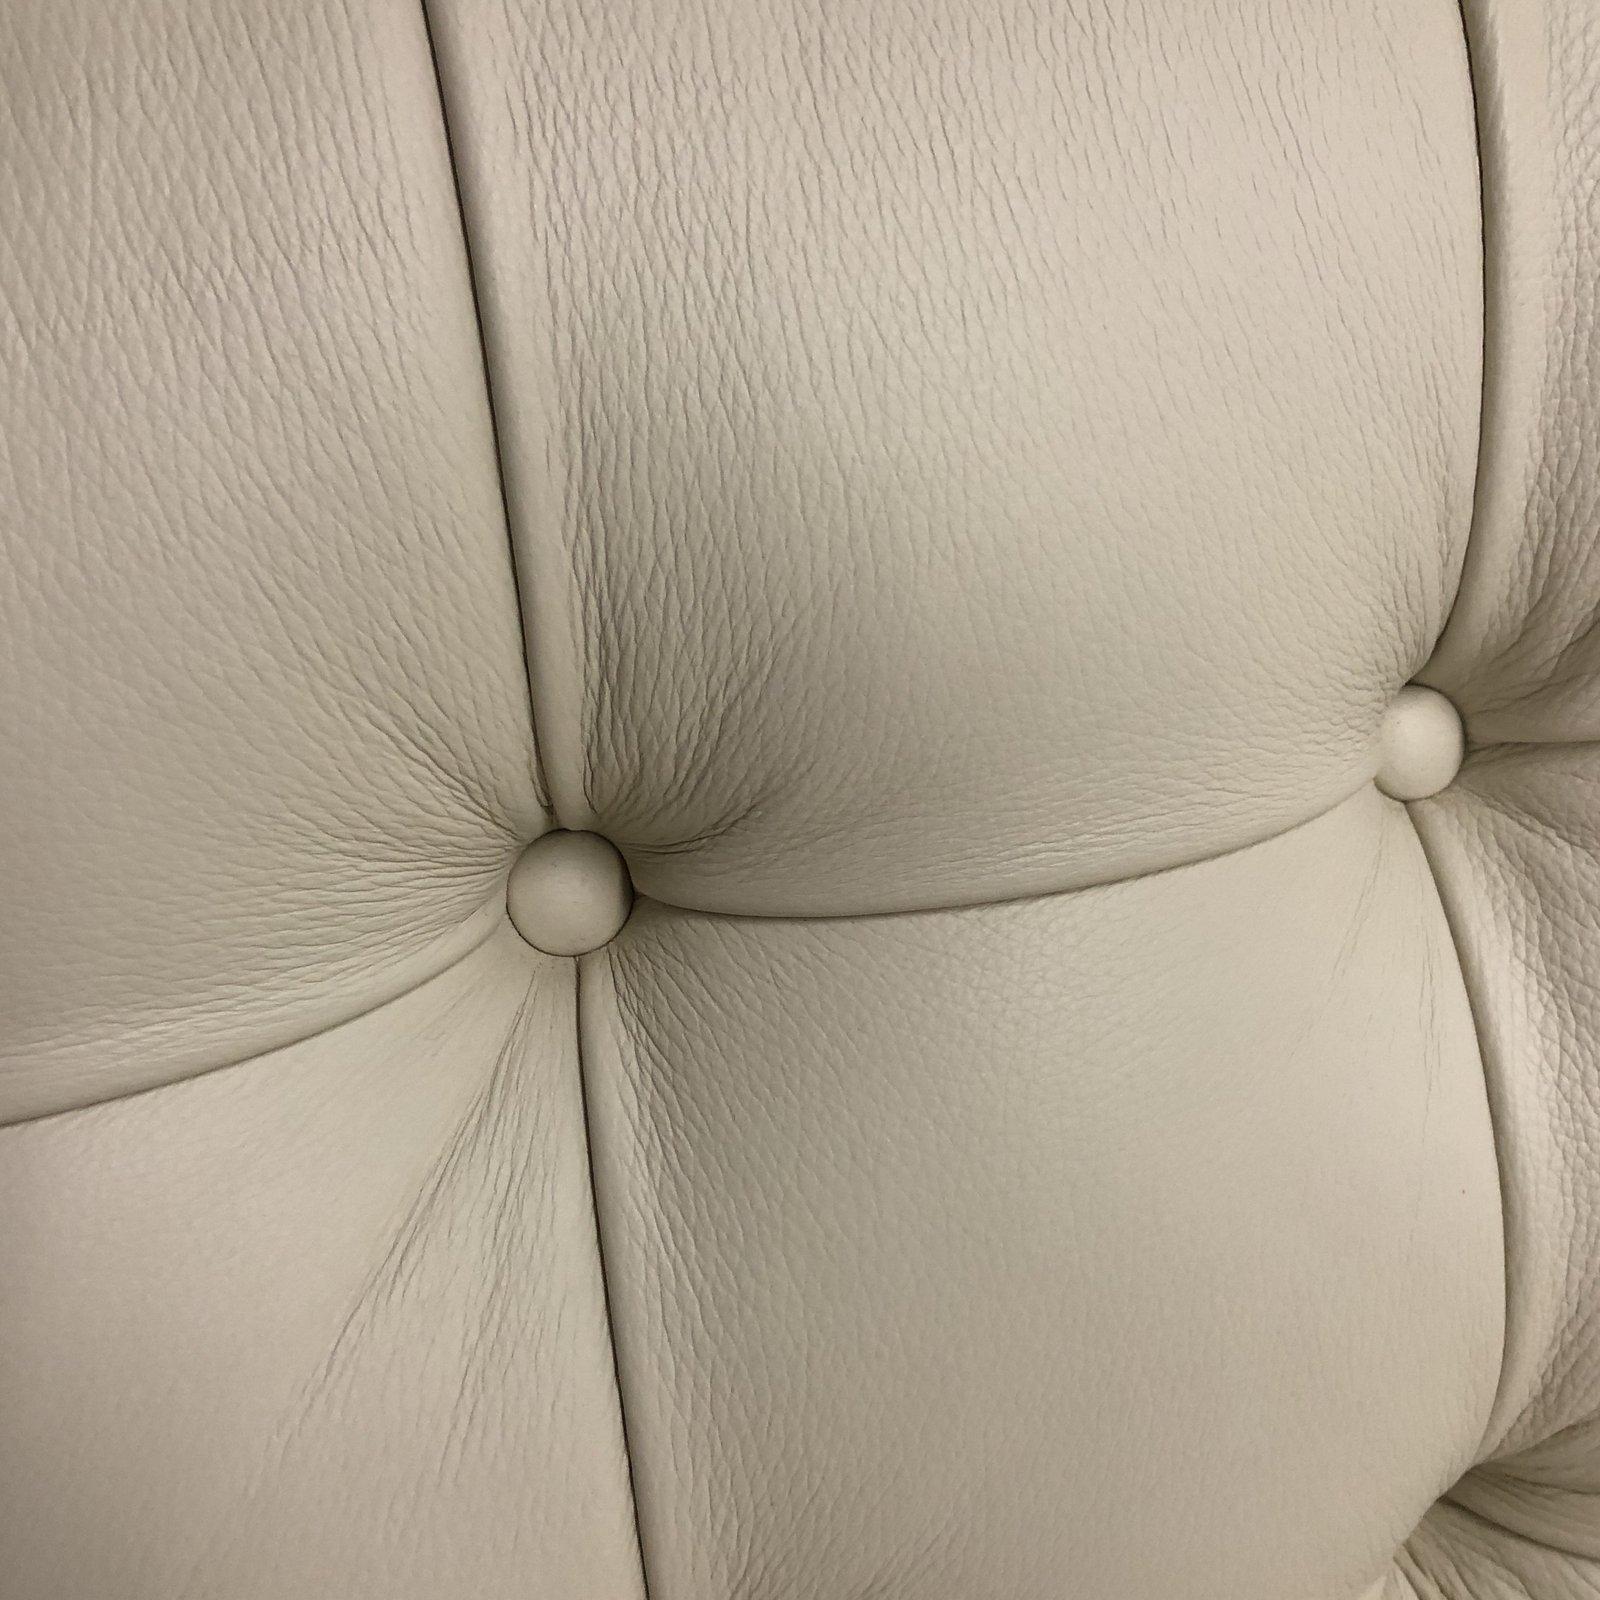 Leathercraft 1410 Harper White Leather Sofa In Good Condition For Sale In San Francisco, CA